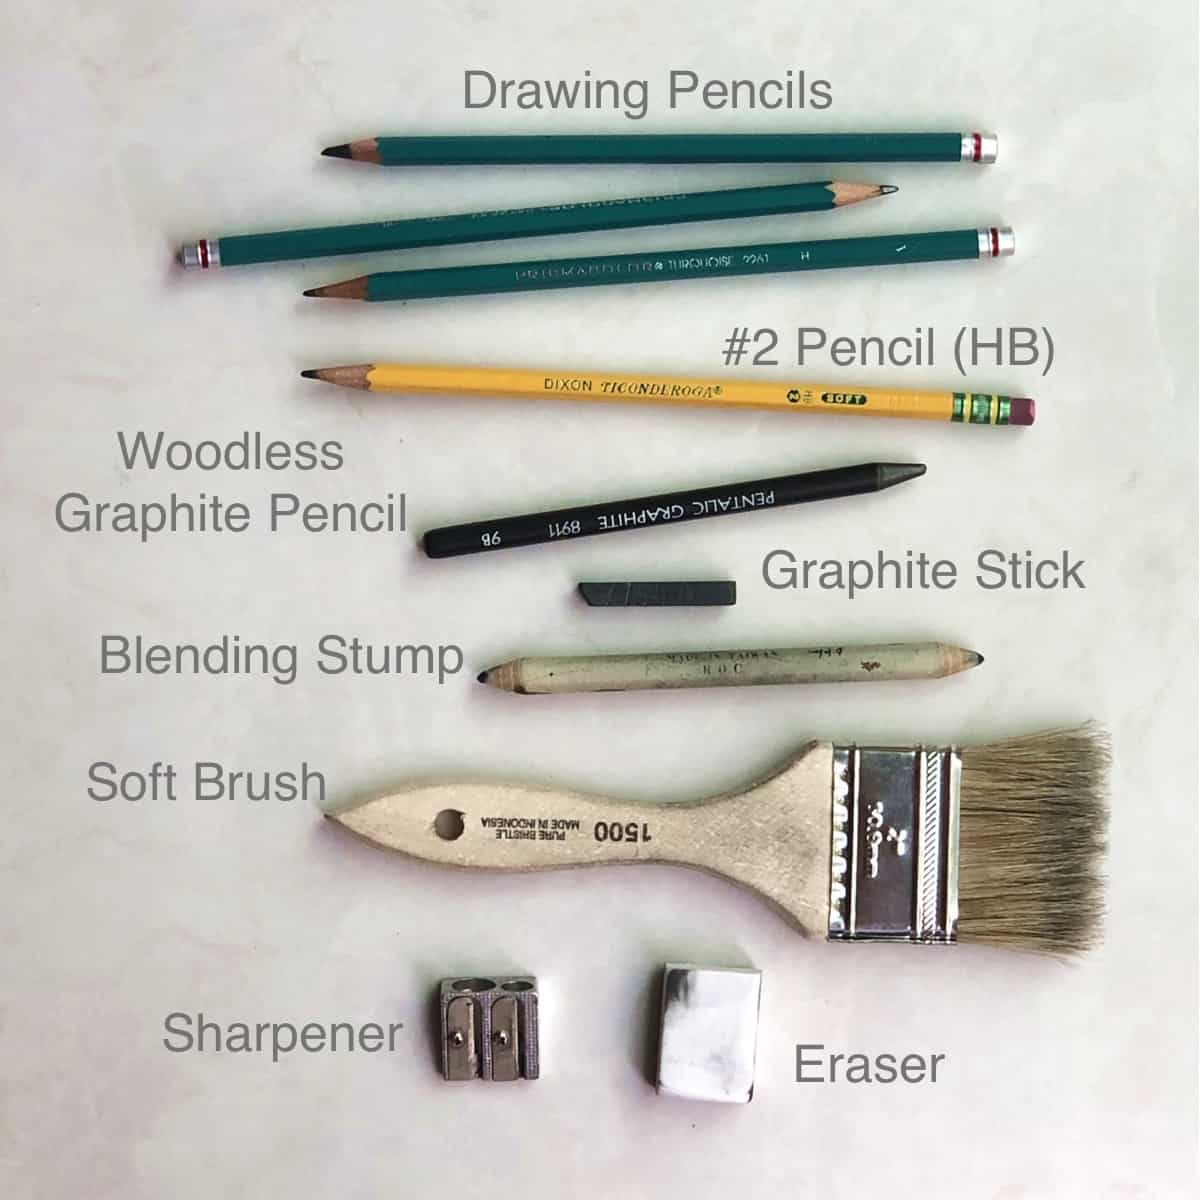 Different drawing and sketching tools including drawing pencils, woodless graphite, graphite stick, blending stump, brush for removing eraser dust, pencil sharpener and eraser.